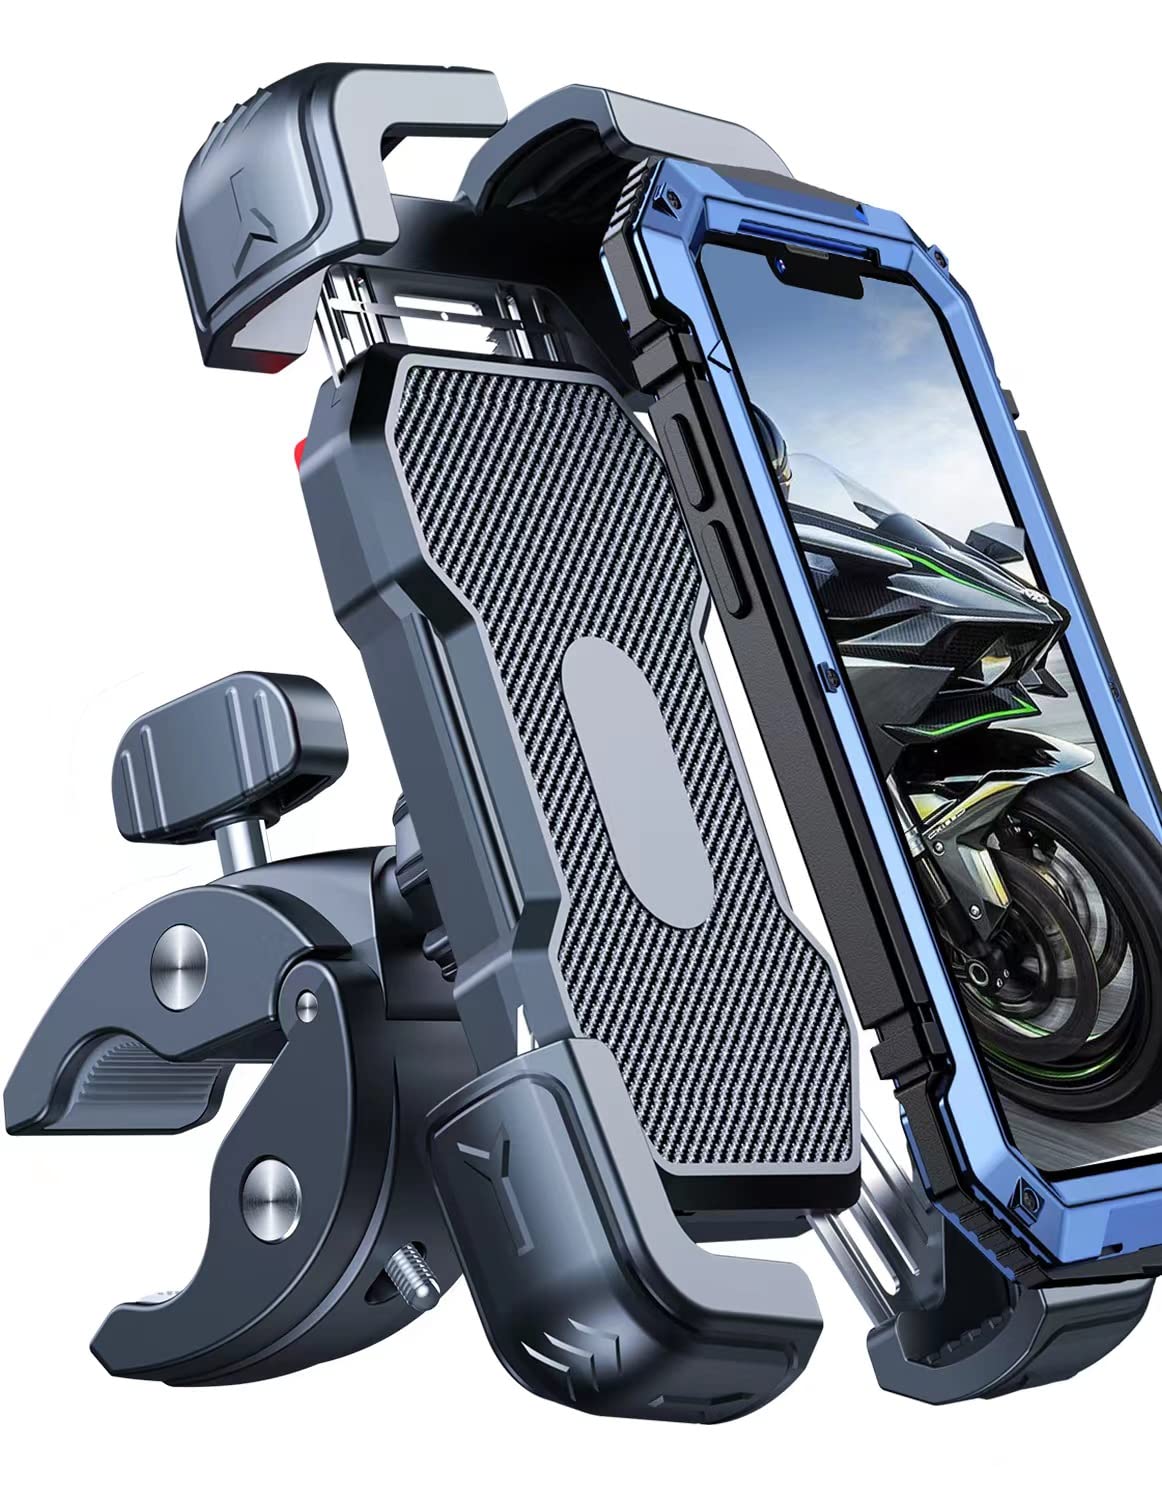 Motorcycle Phone Mount, [150mph Wind Anti-Shake][7.2inch Big Phone Friendly] Bike Phone Holder for Bicycle, [5s Easy Install] Handlebar Phone Mount, Compatible with iPhone, All Cell Phones